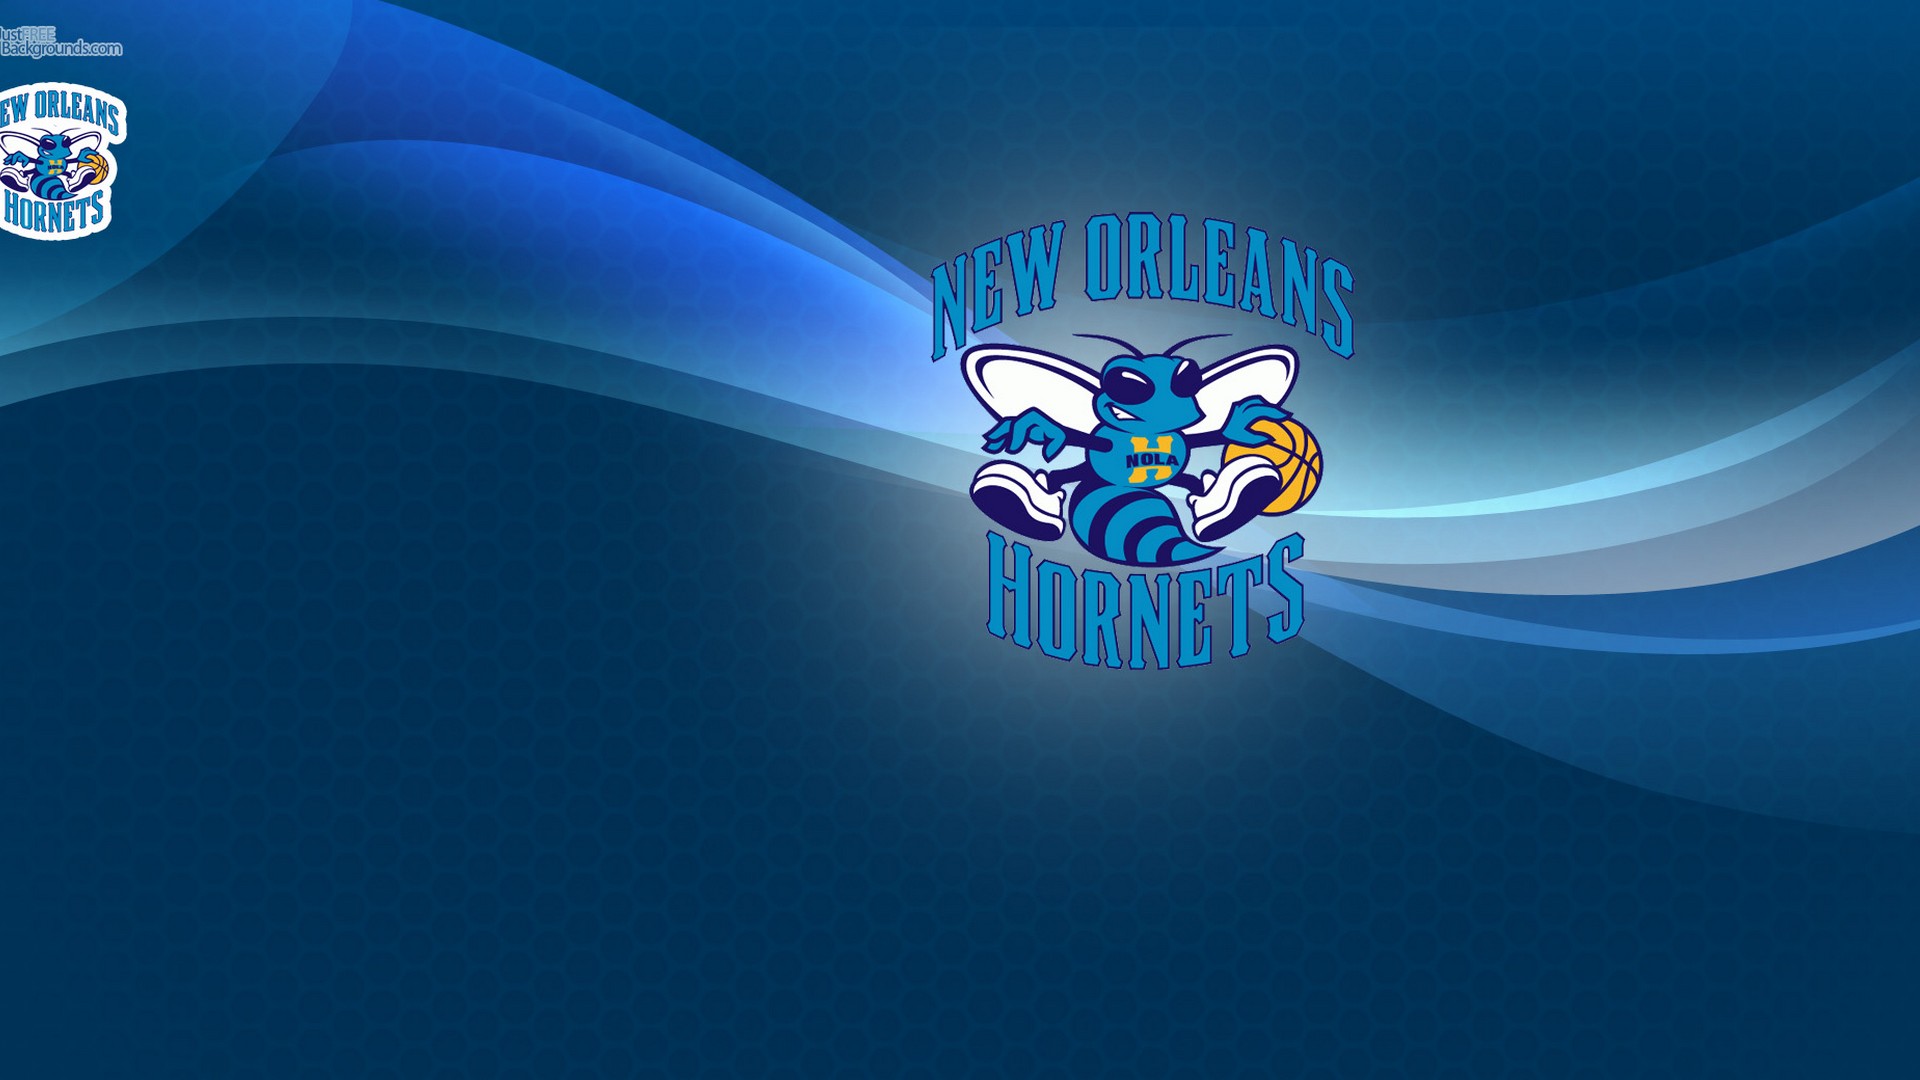 HD Desktop Wallpaper Charlotte Hornets with high-resolution 1920x1080 pixel. You can use this wallpaper for your Desktop Computer Backgrounds, Windows or Mac Screensavers, iPhone Lock screen, Tablet or Android and another Mobile Phone device